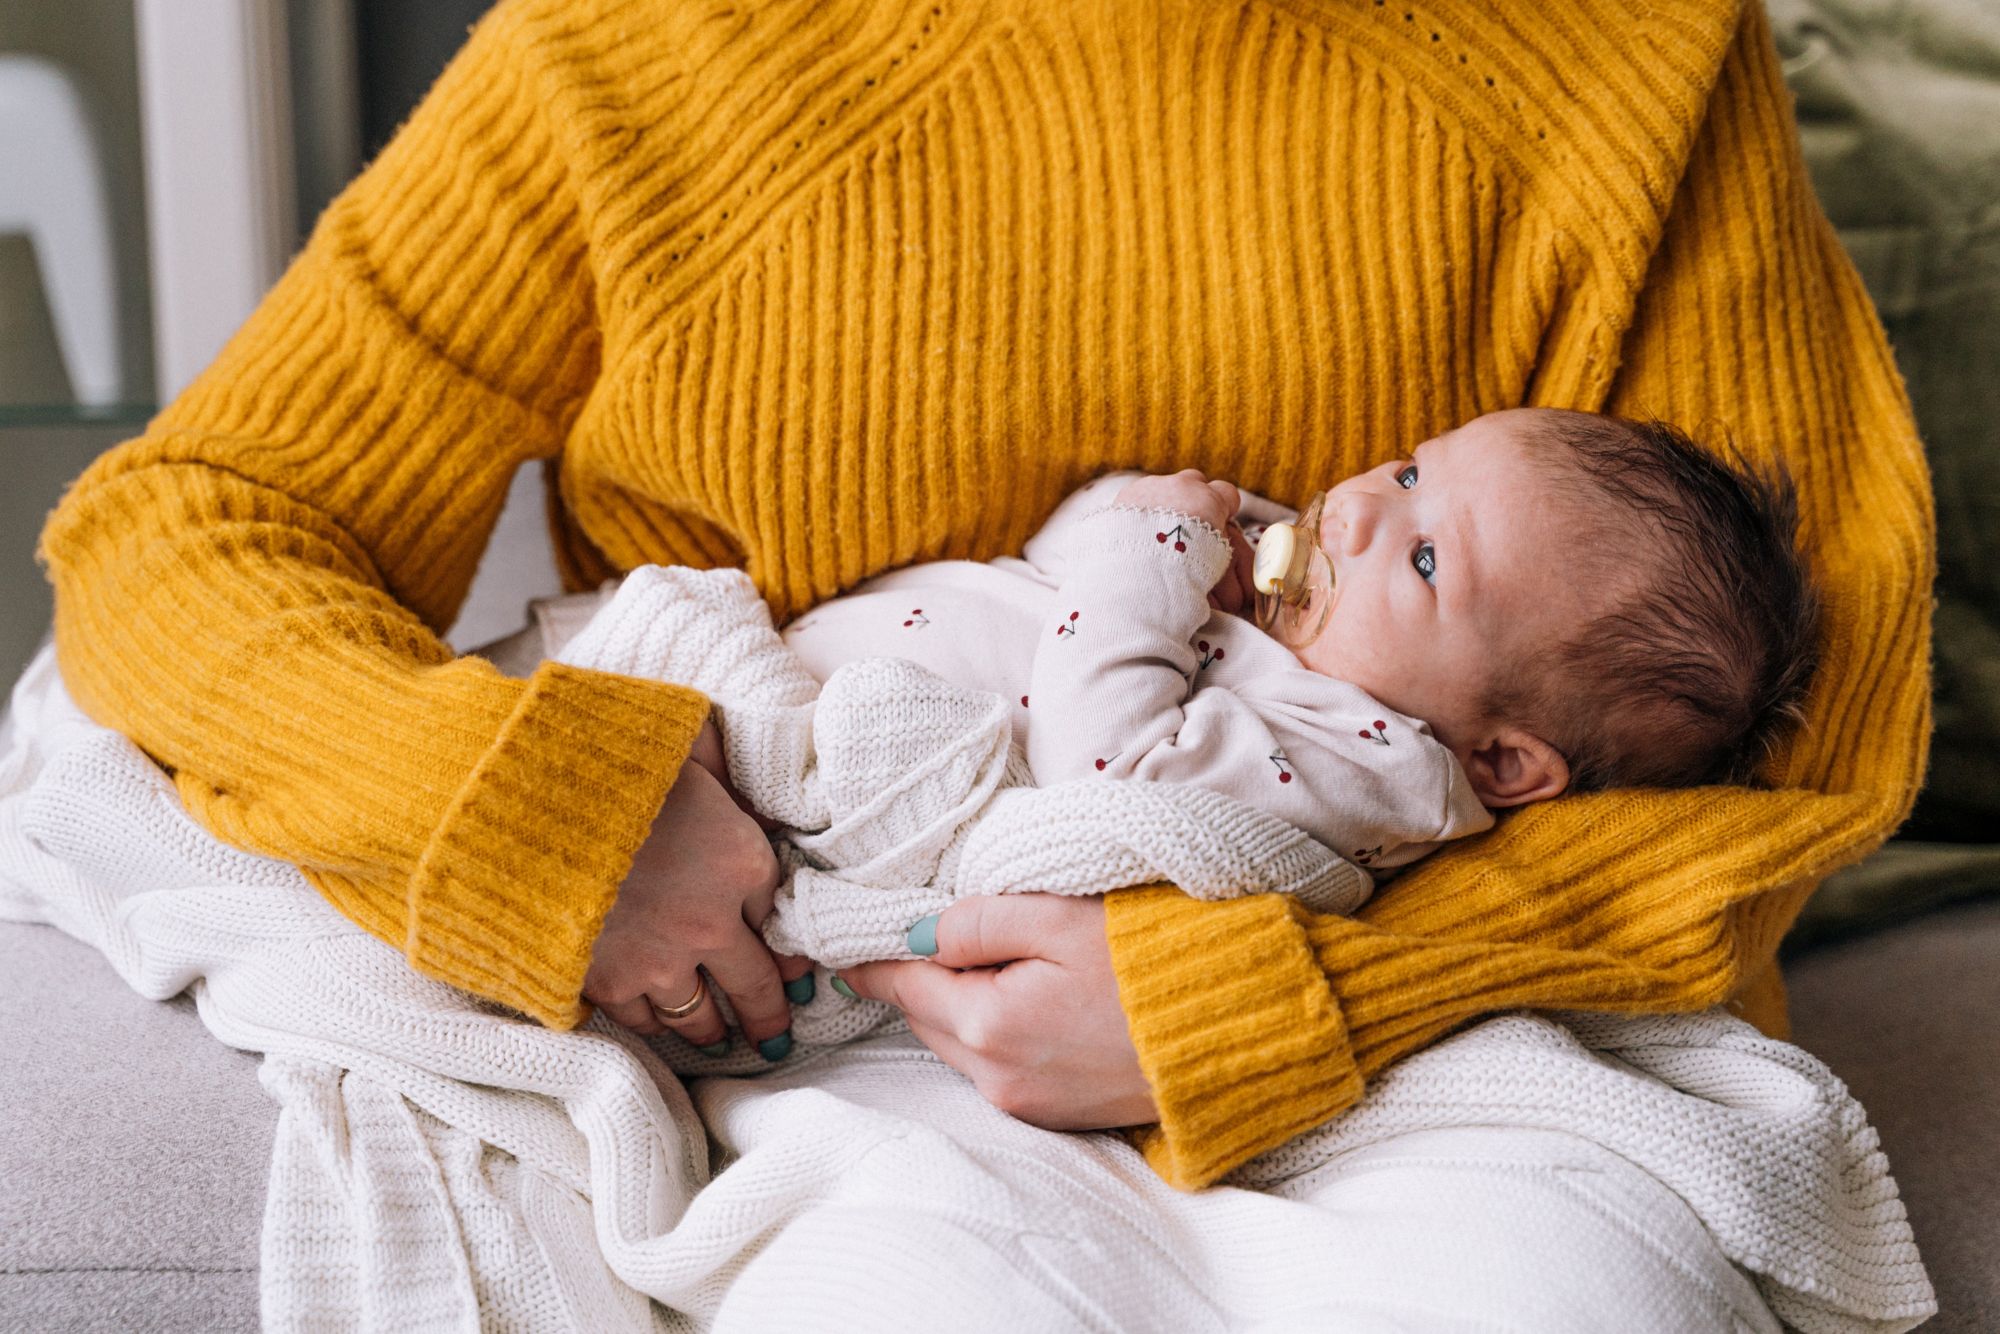 woman with a yellow sweater holding a baby to rock to sleep.